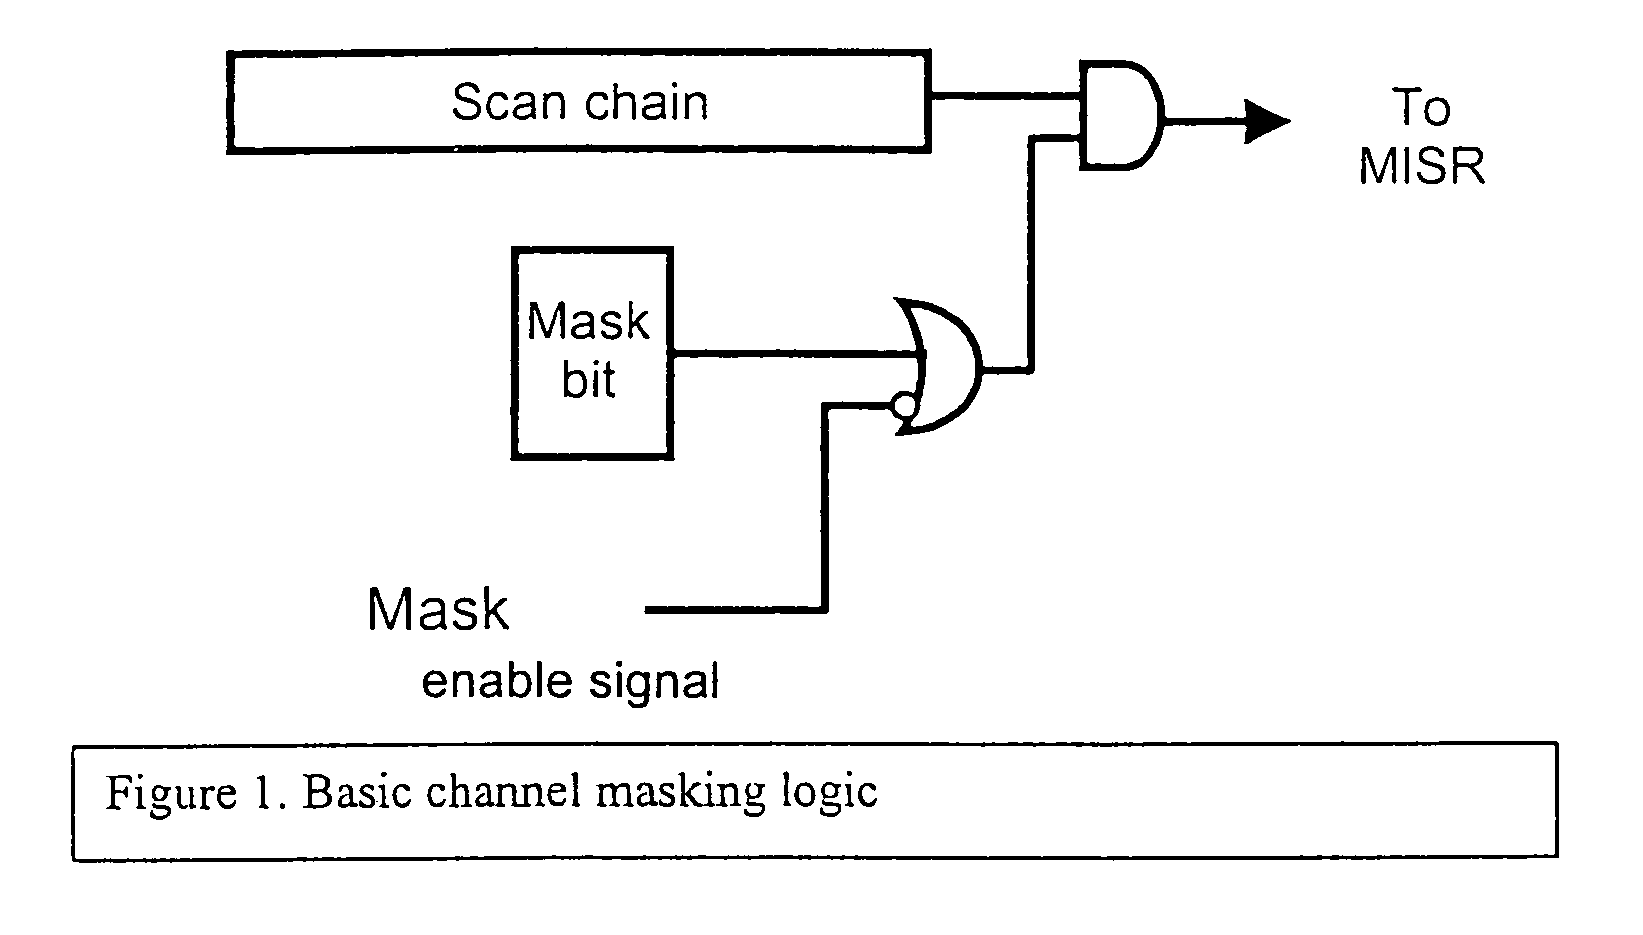 Channel masking during integrated circuit testing